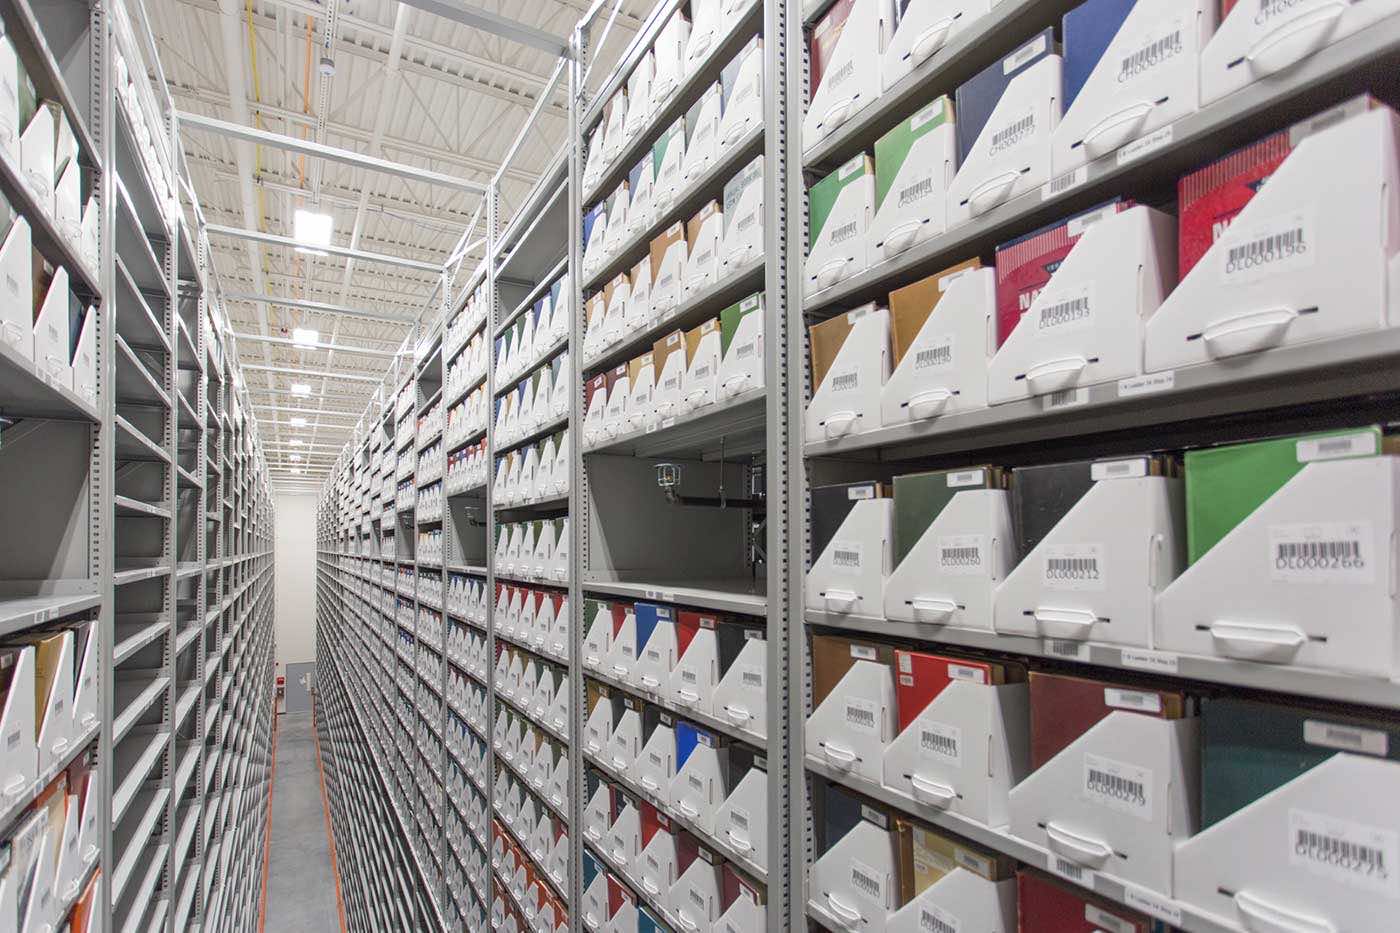 Documents and books stored on Spacesaver High-Bay stacks in off-site storage